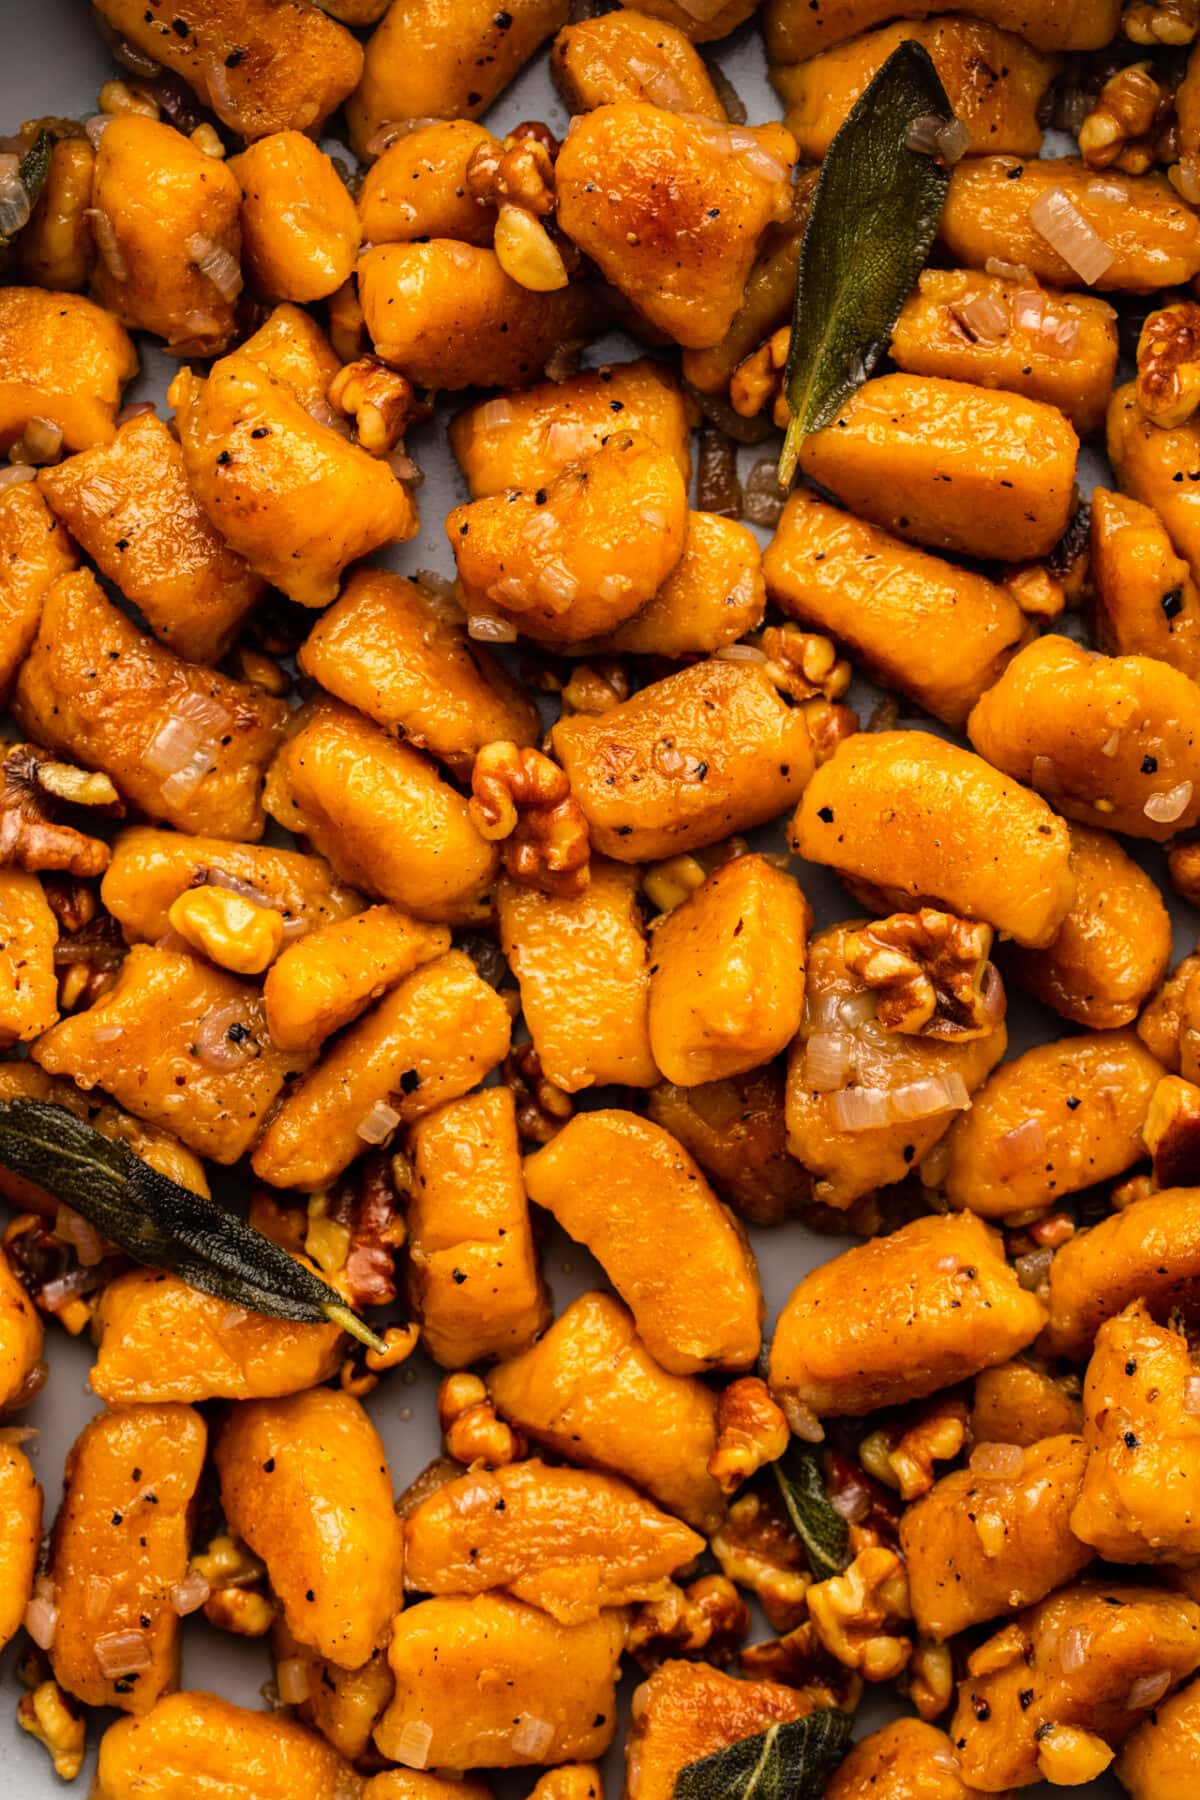 a zoomed in image of butternut squash gnocchi showing its texture